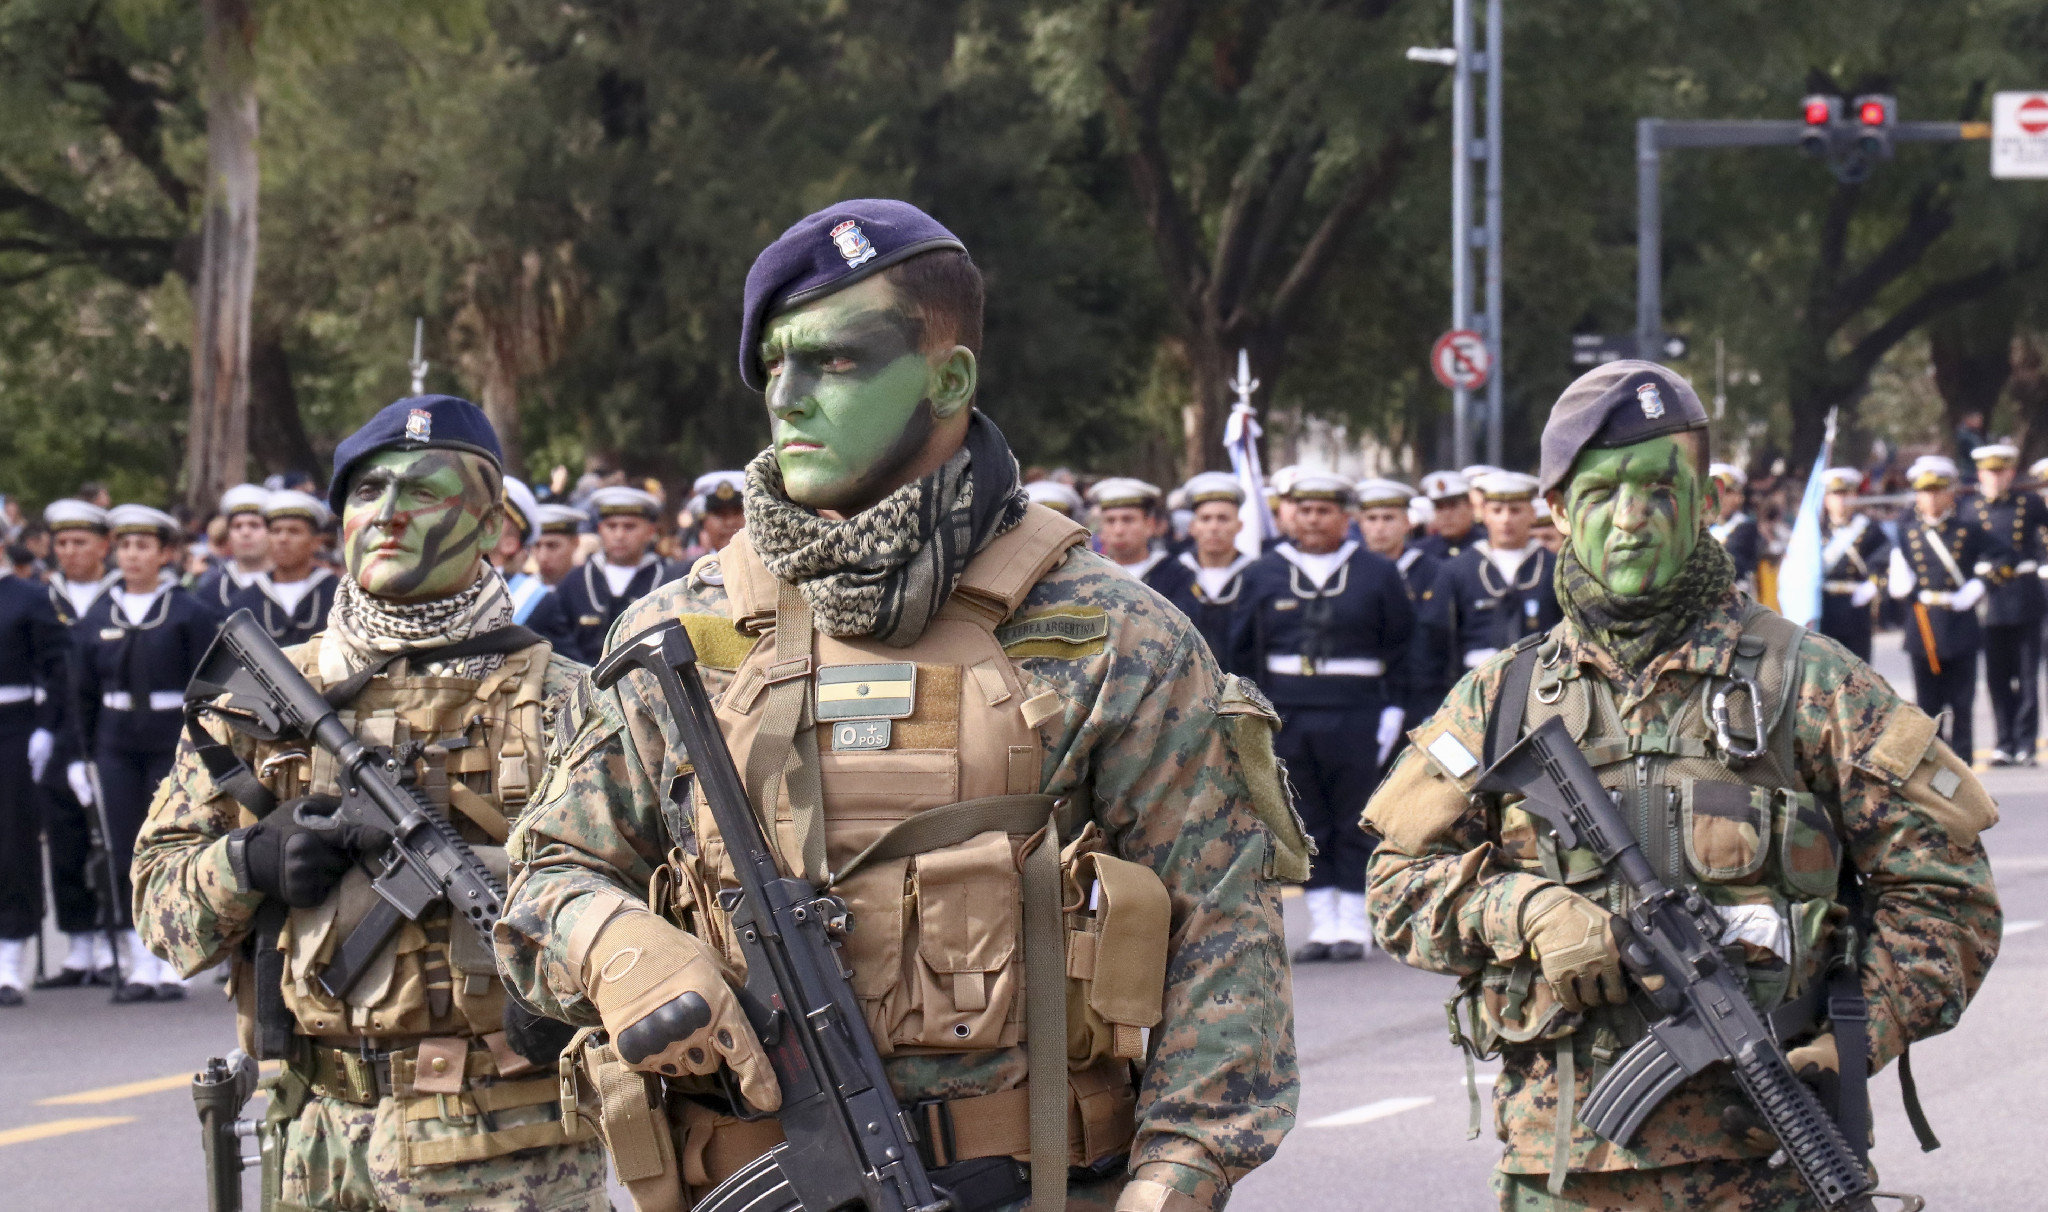 Argentinian soldiers on parade for Independence Day celebrations, Buenos Aires, 9 July 2019. (Photo: Muhammed Emin Canik/Anadolu Agency/Getty Images)